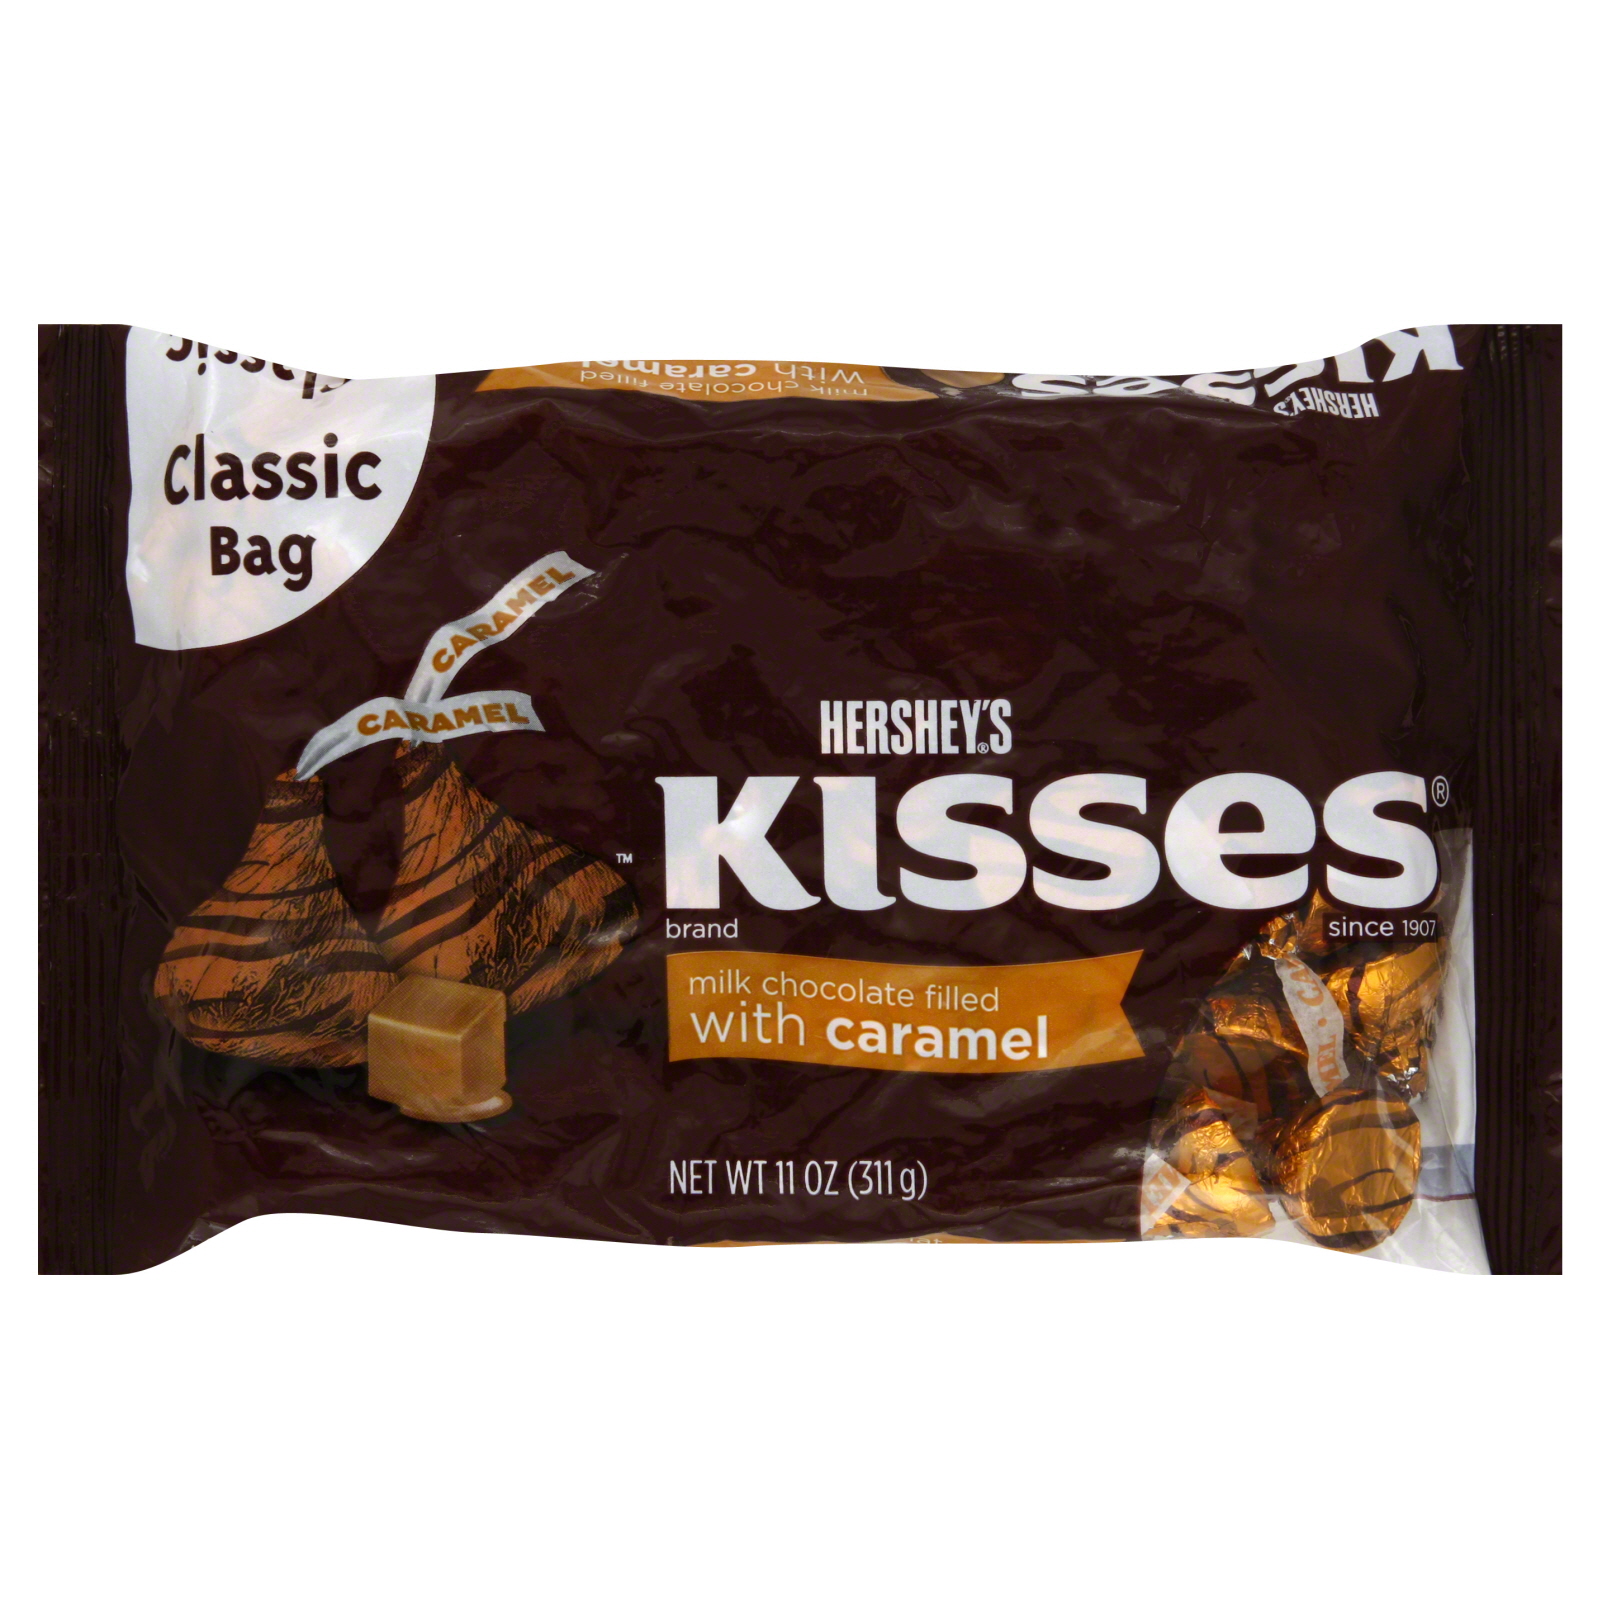 Hershey's Kisses, Milk Chocolate, Filled with Caramel, 11 oz (311 g)